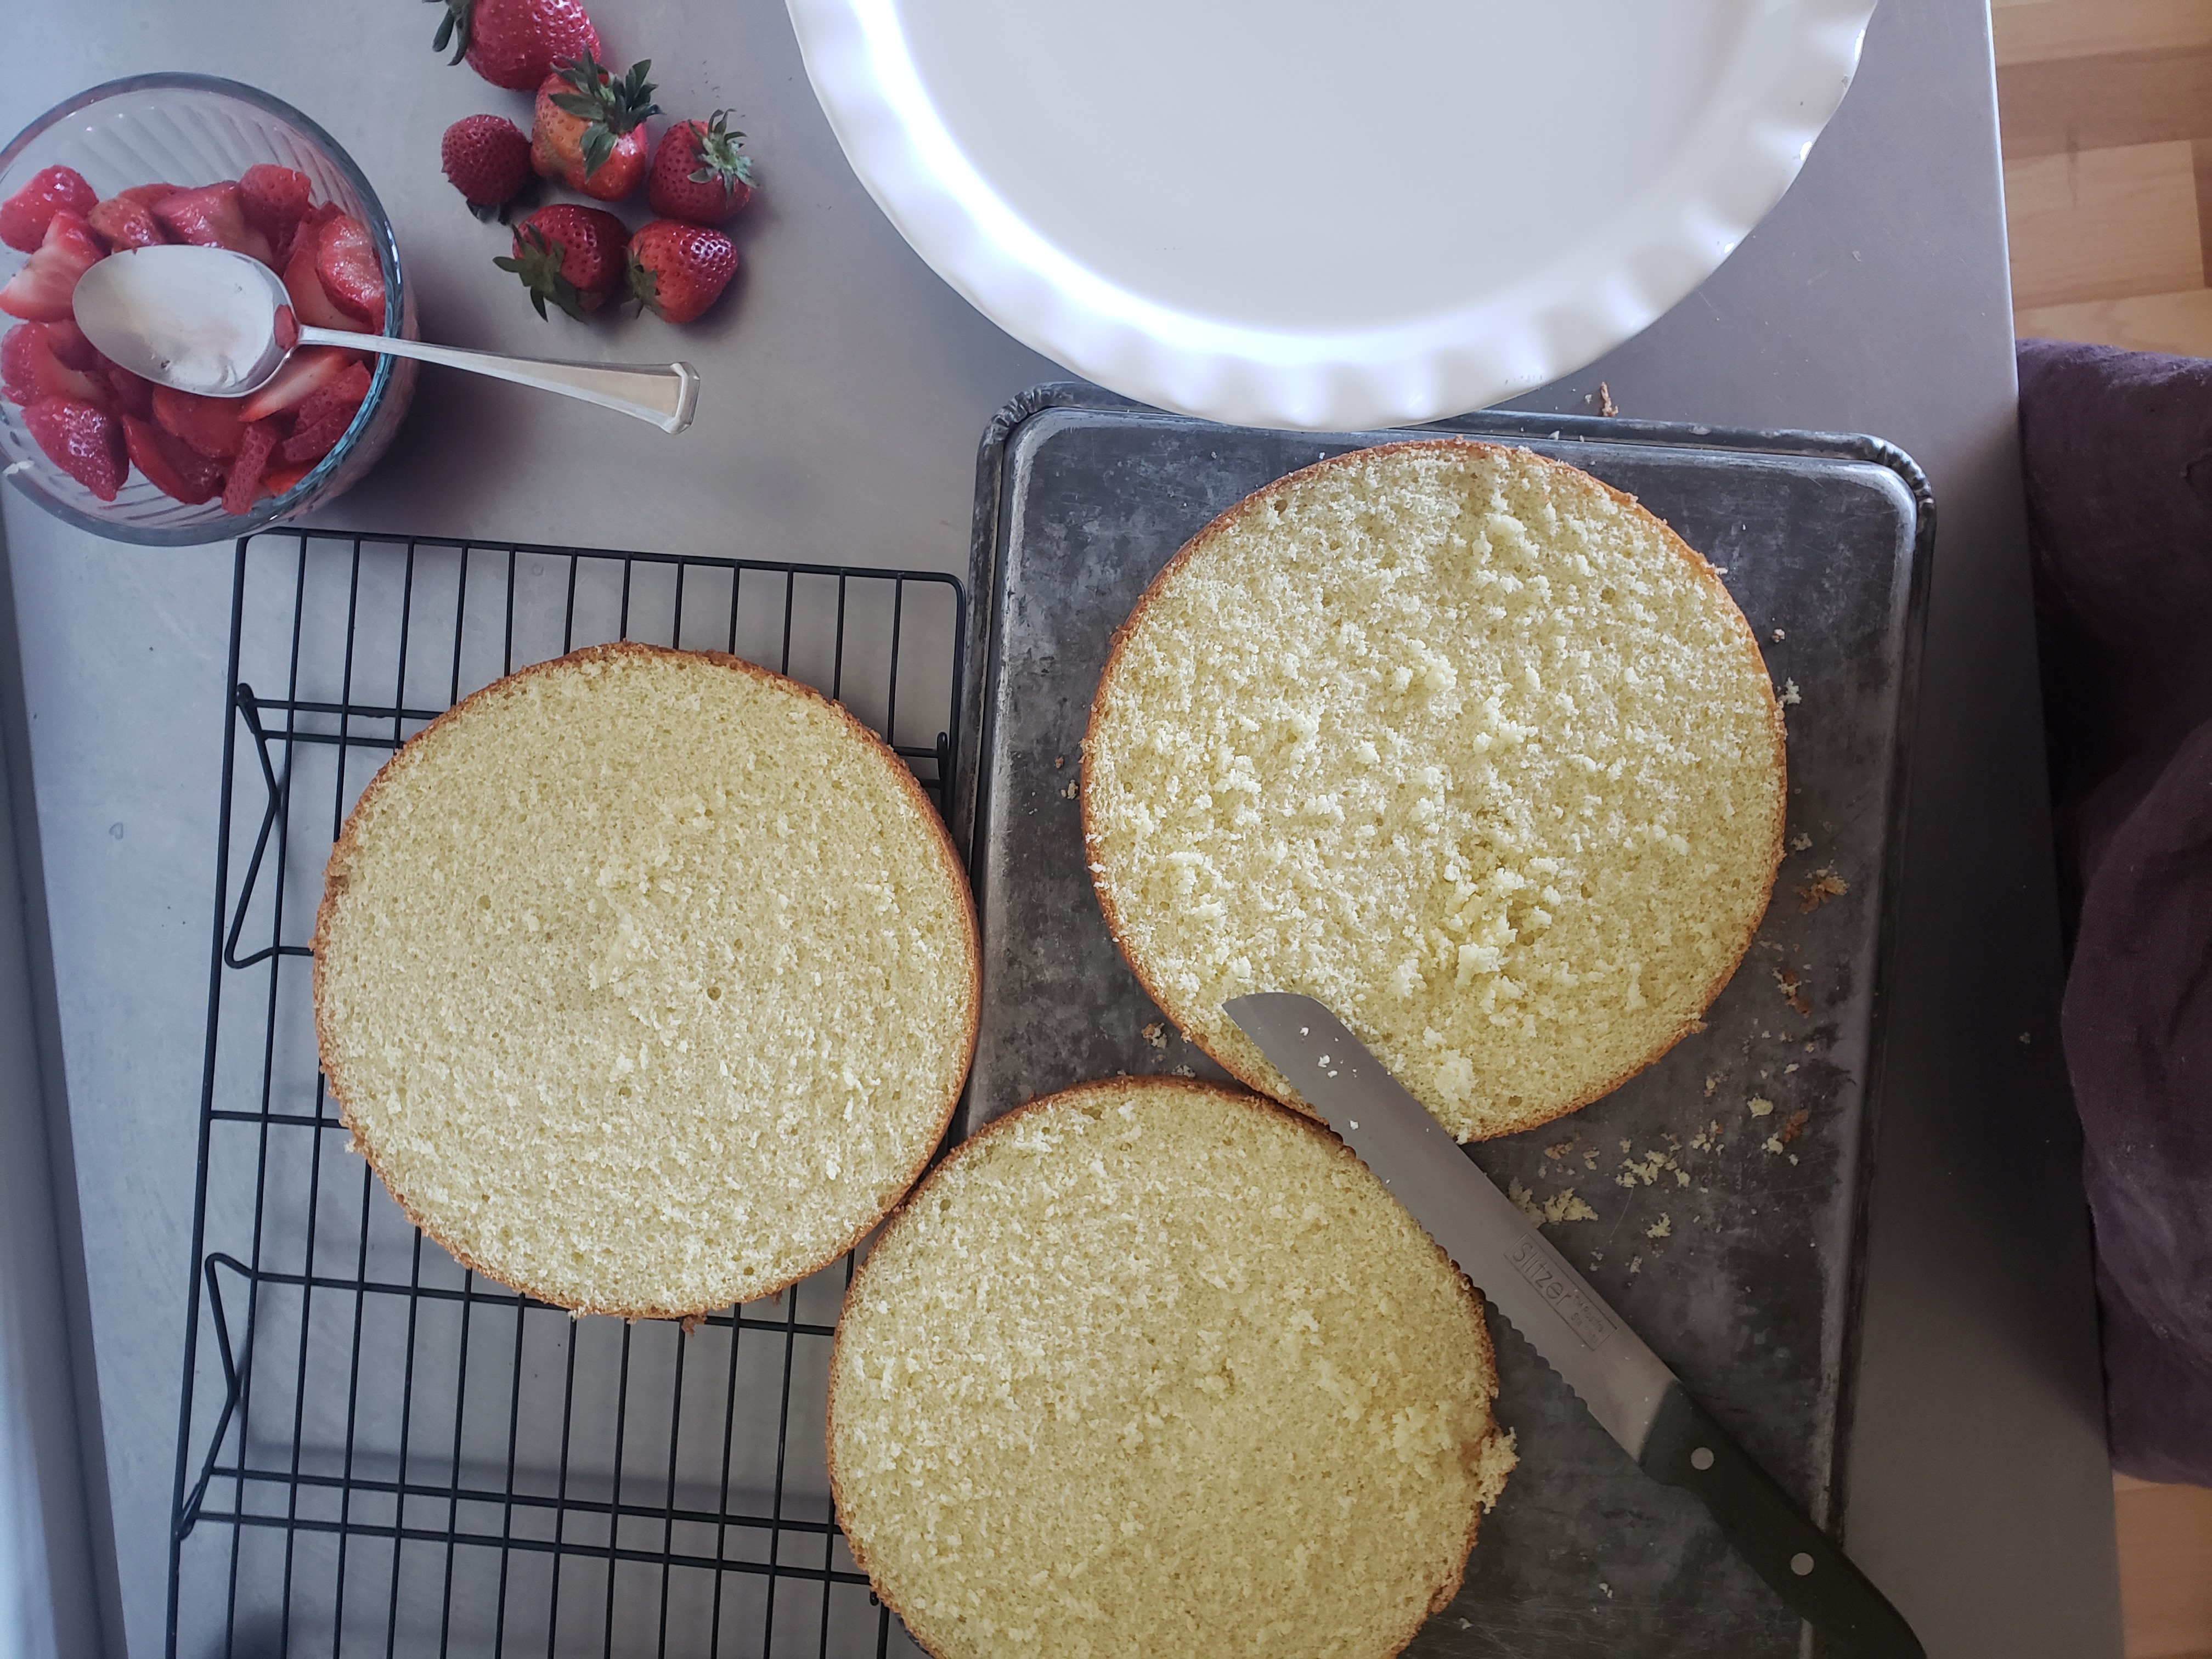 Round cake cut into 3 layers